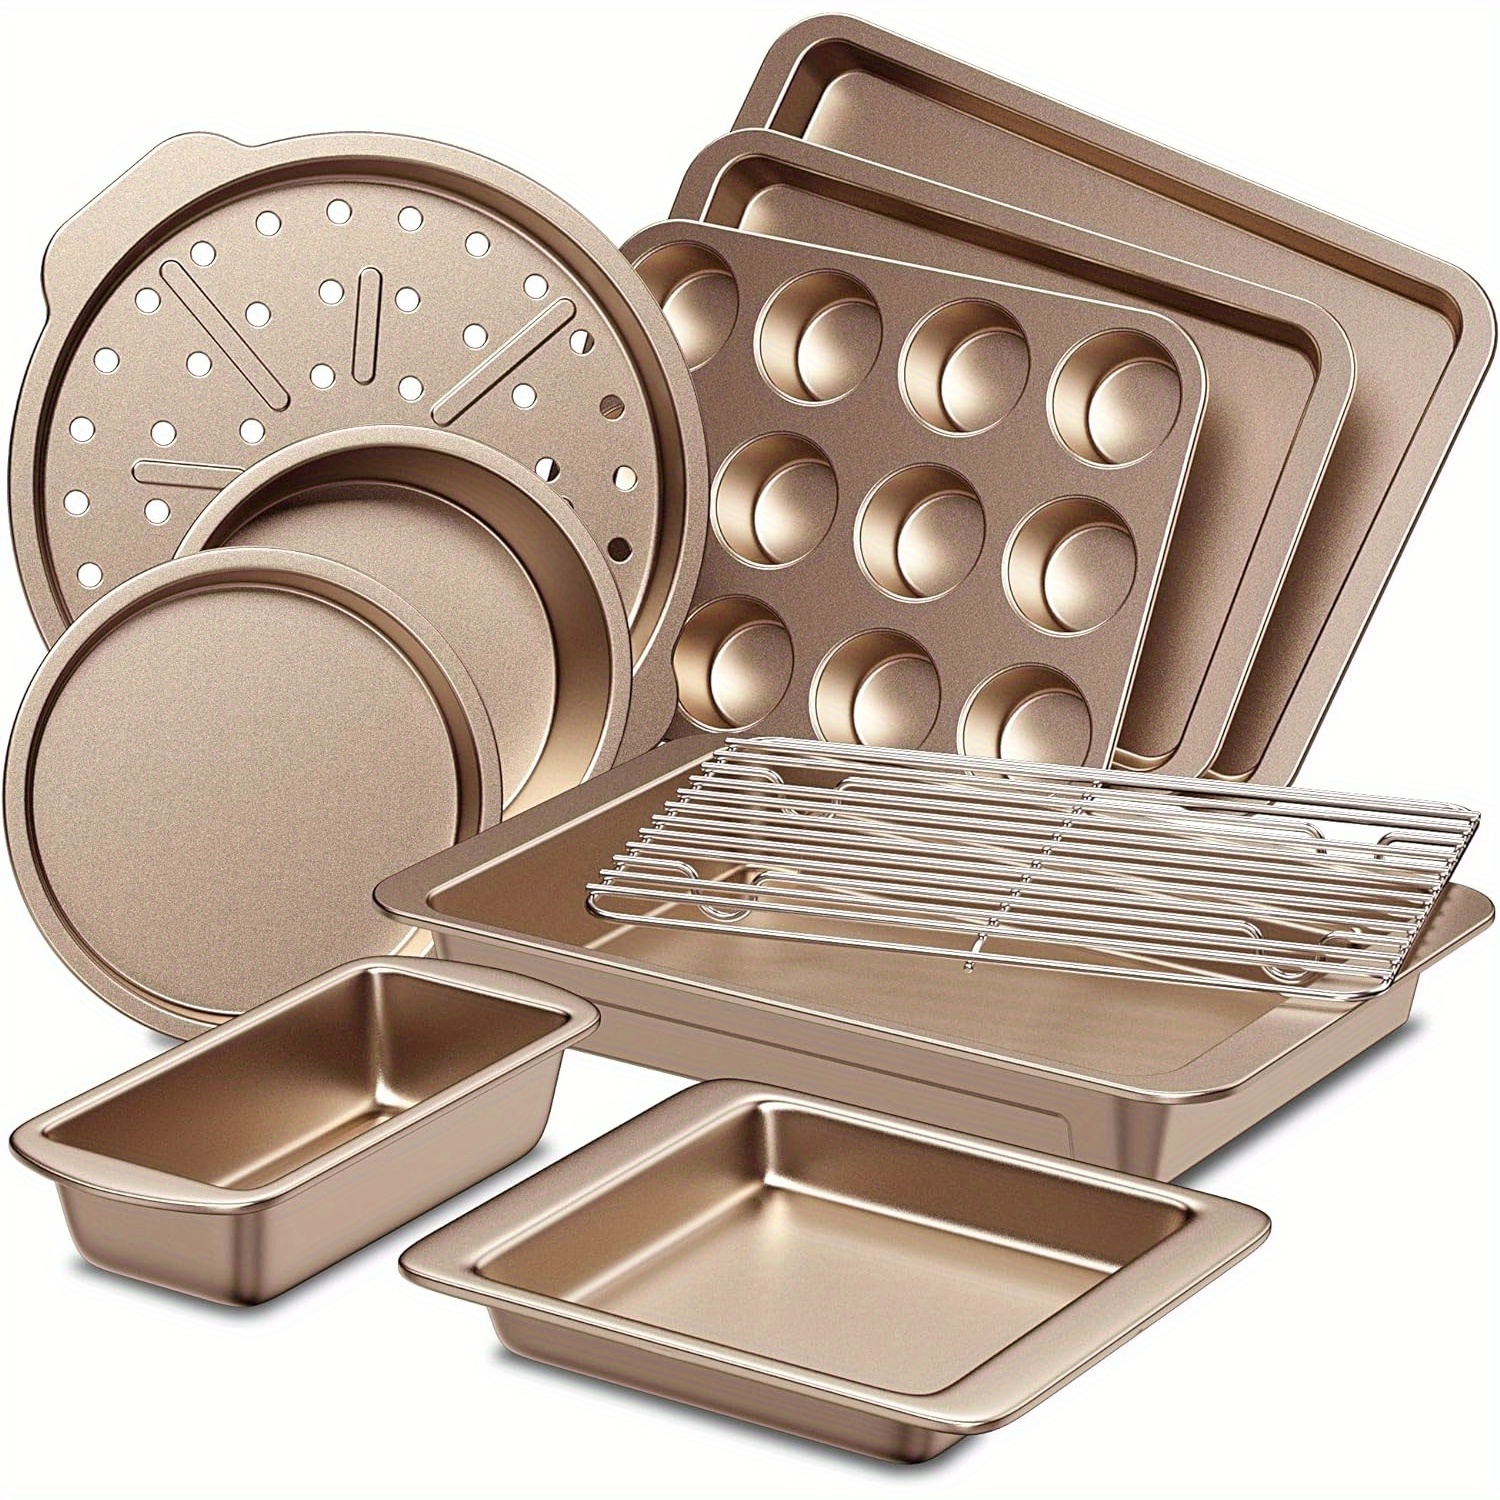 

Hongbake Bakeware Sets, Baking Pans Set, Nonstick Oven Pan For Kitchen With Wider Grips, 10-piece Including Rack, Cookie Sheet, Cake Pans, Loaf Pan, Muffin Pan, Pizza Pan - Champagne Gold